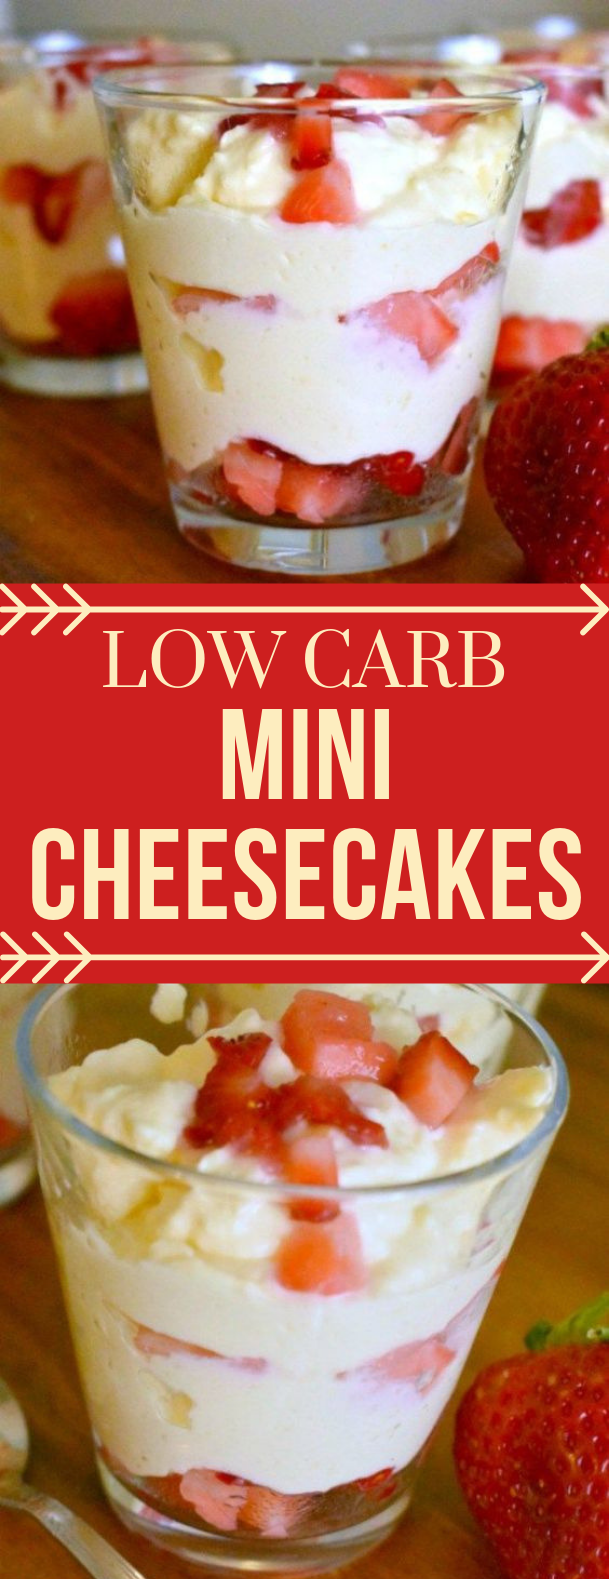 Low Carb Mini Cheesecakes #healthydesserts #sugarfree